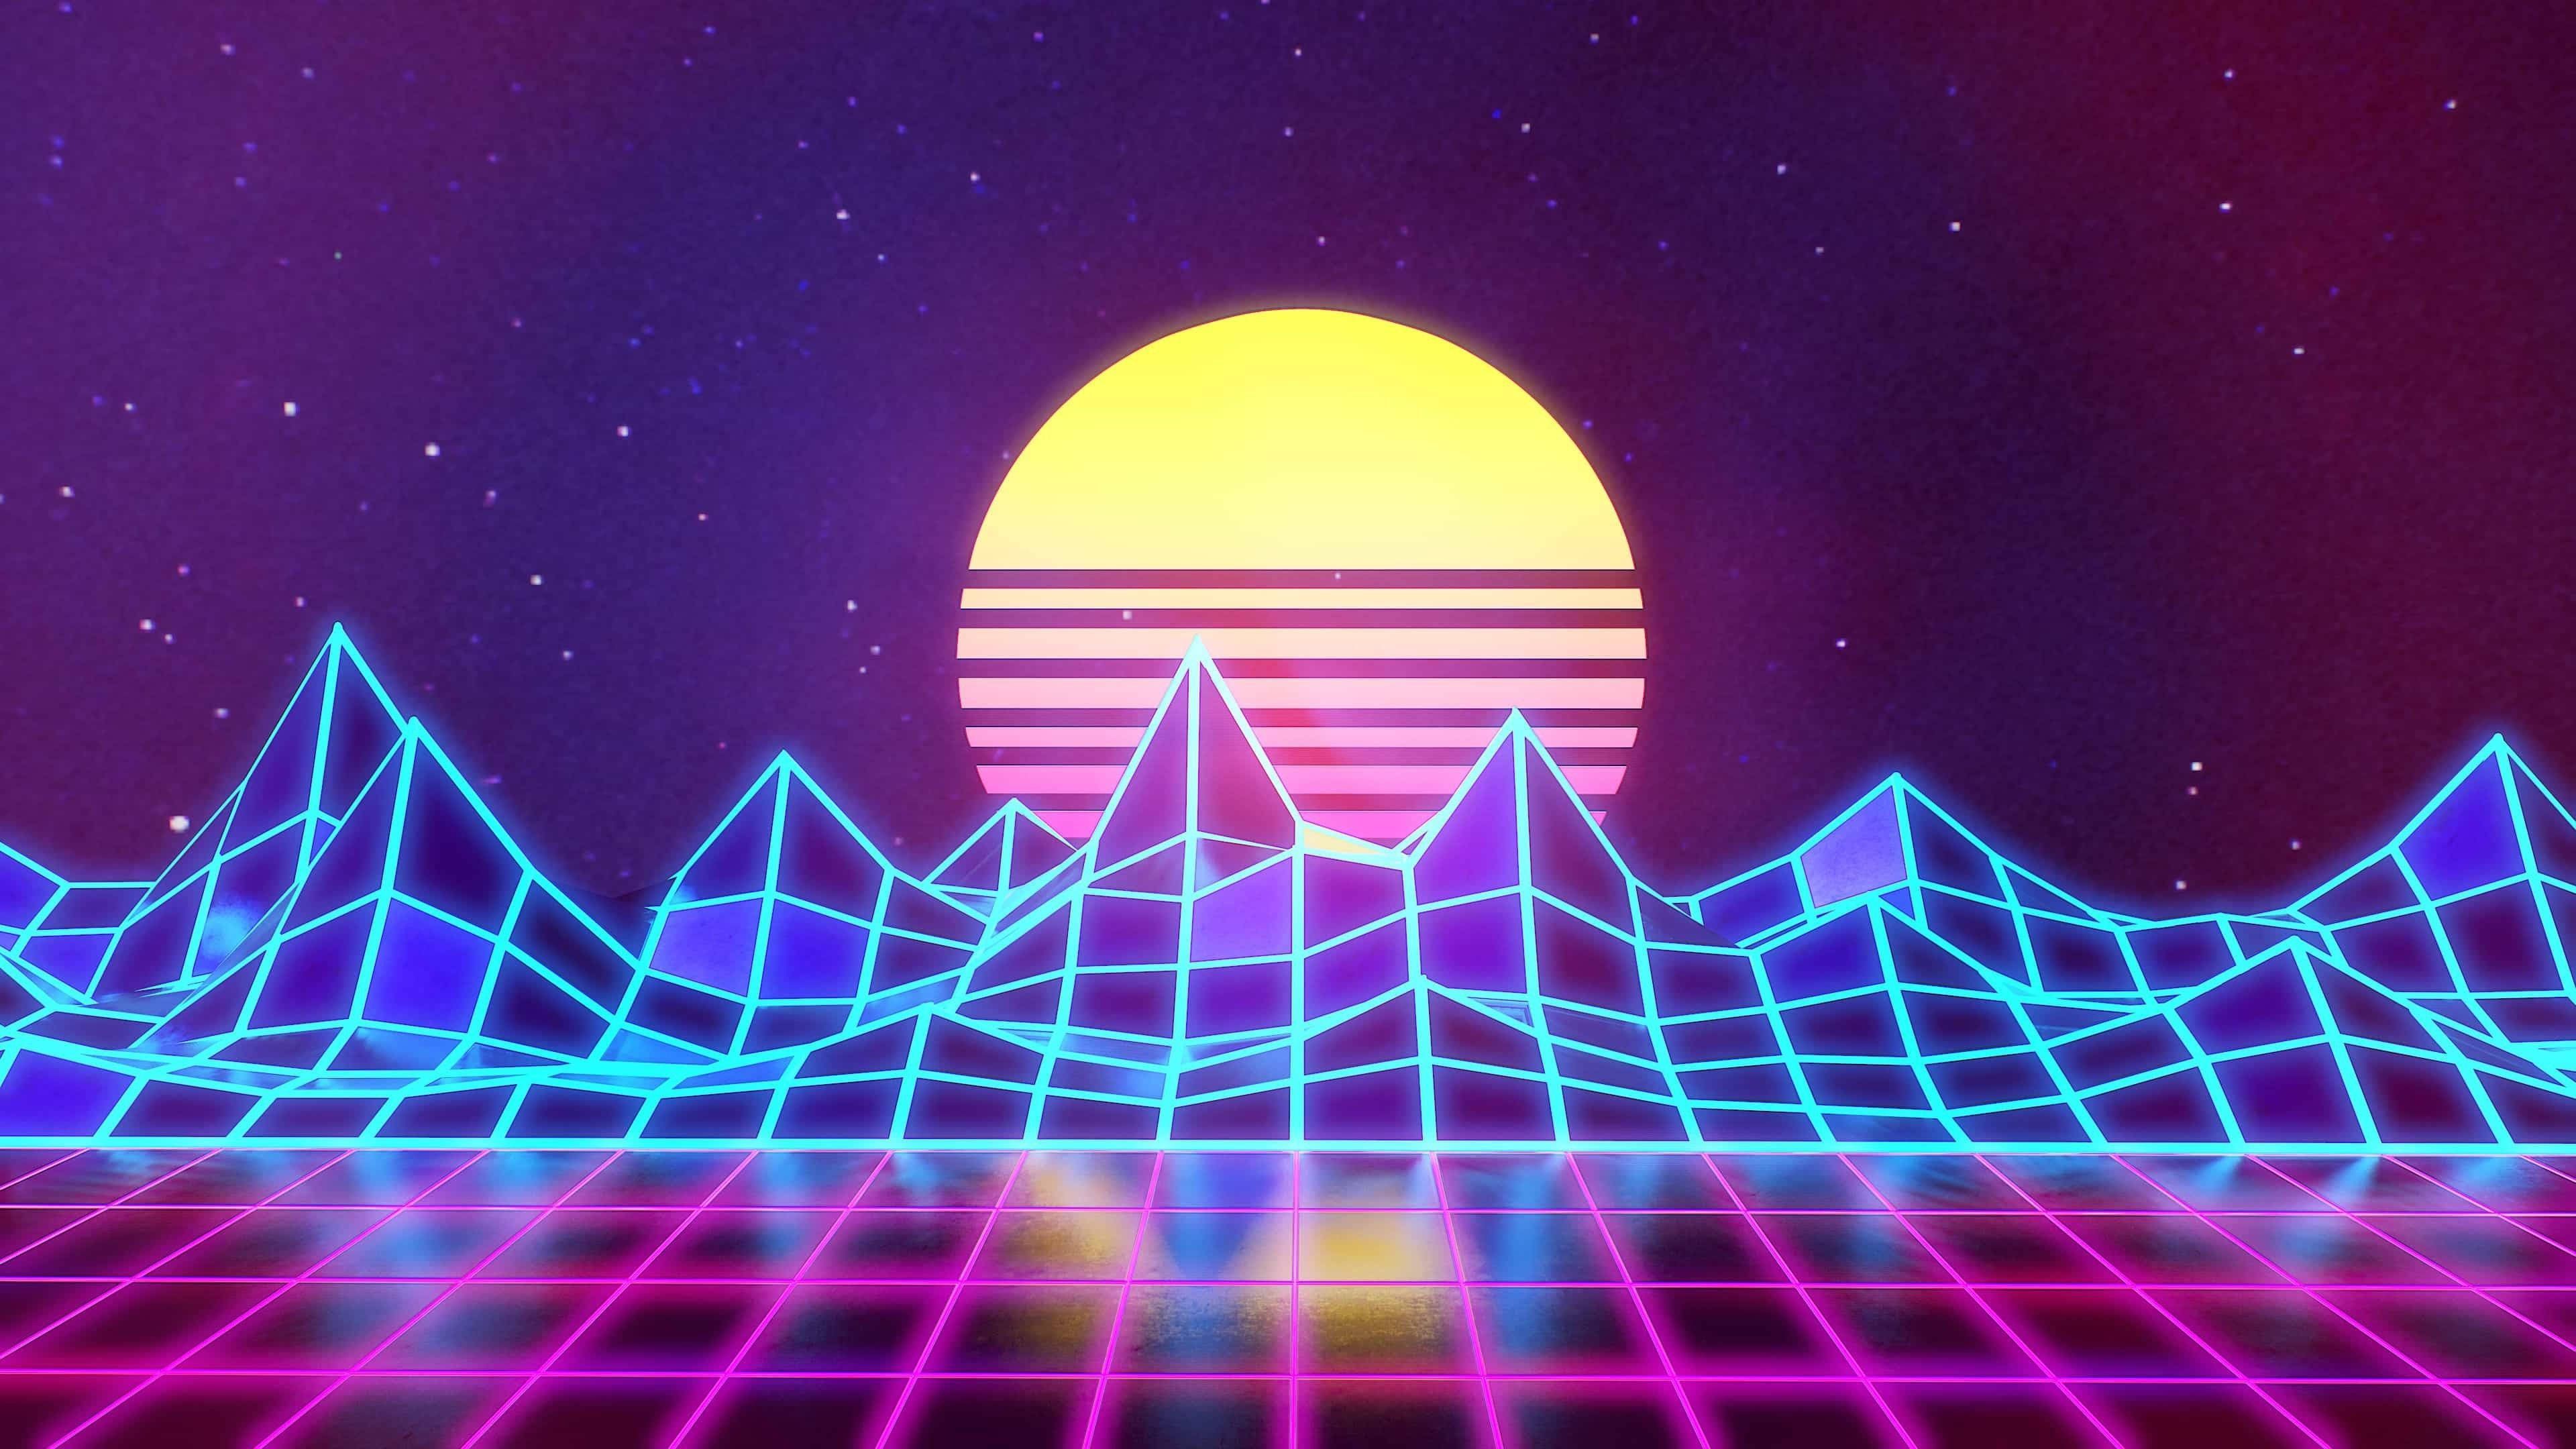 Download 80s Synthwave Wallpaper